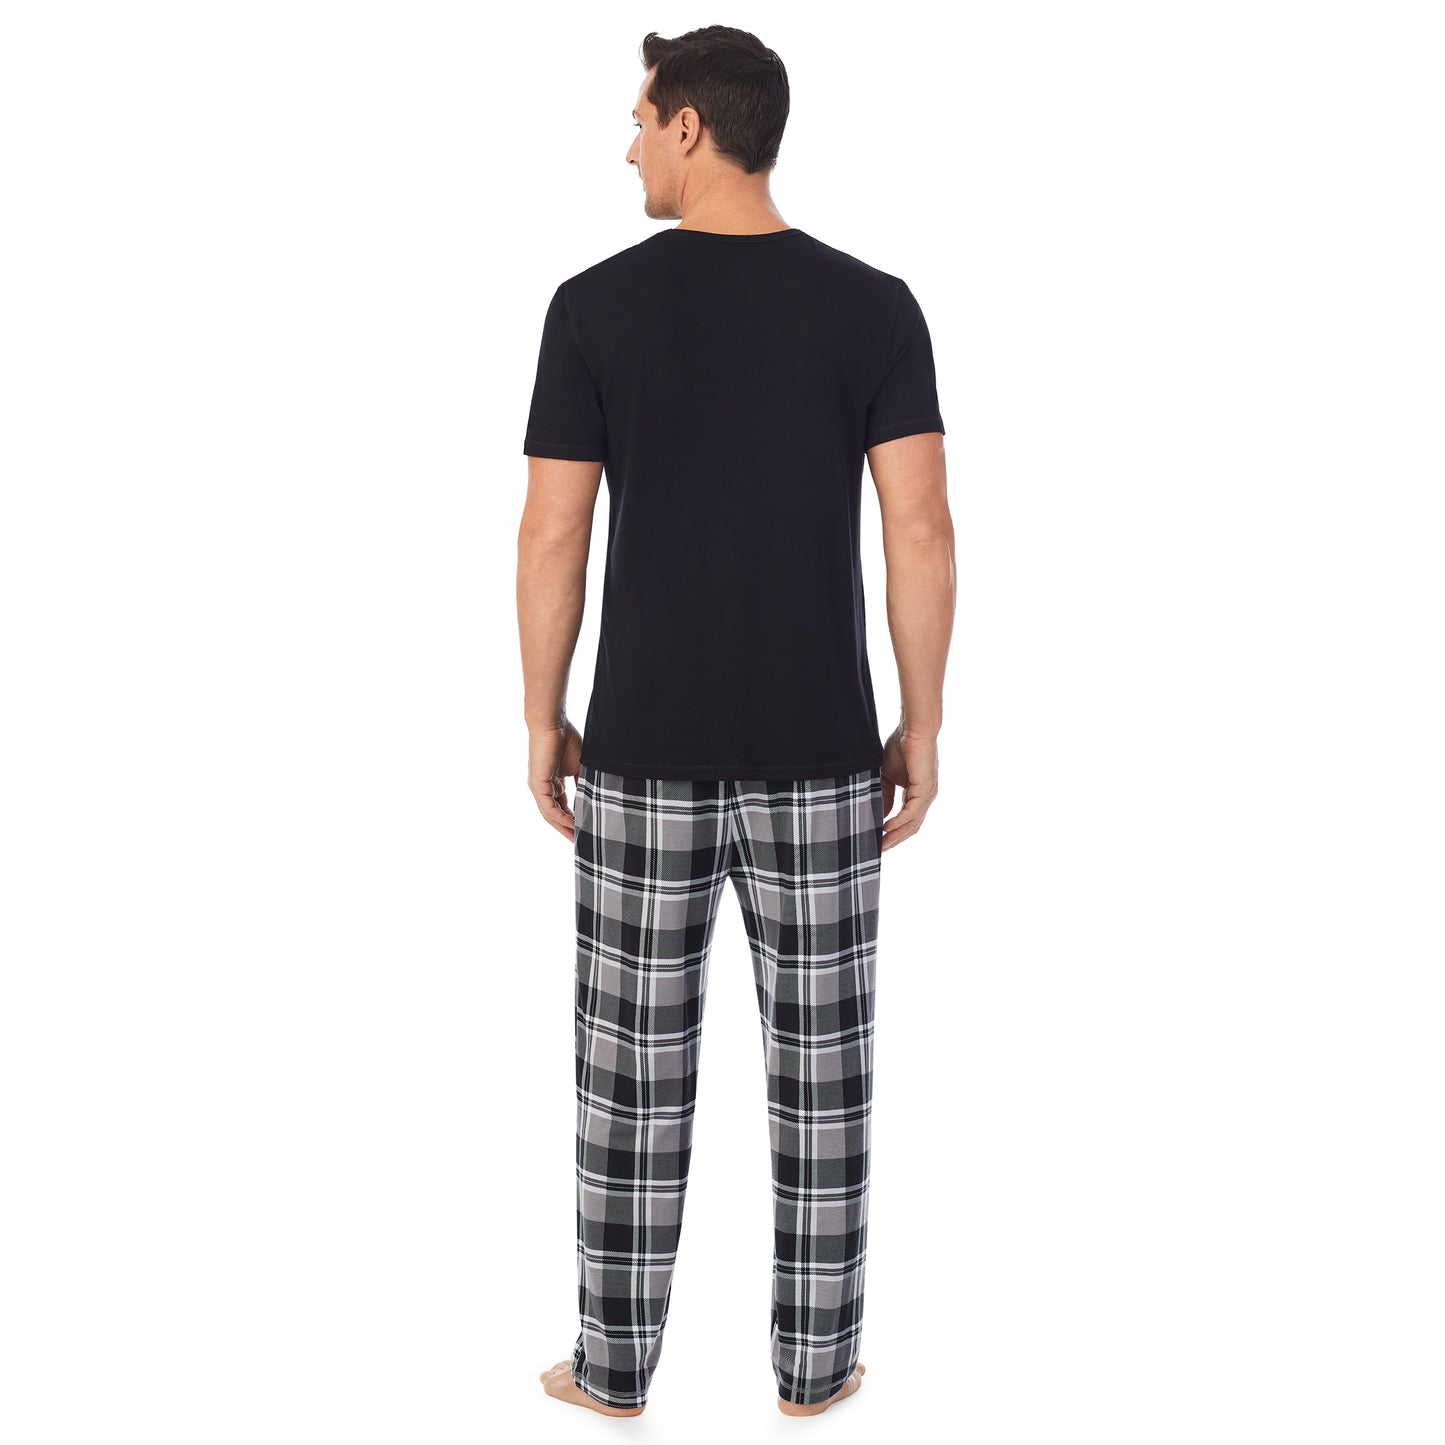 Dark Grey Palms;Model is wearing size M. He is 6'2", Waist 32", Inseam 32".@ A lady wearingMens Short Sleeve Crew Neck Top and Pant Pajama Set with Dark Grey Palms print